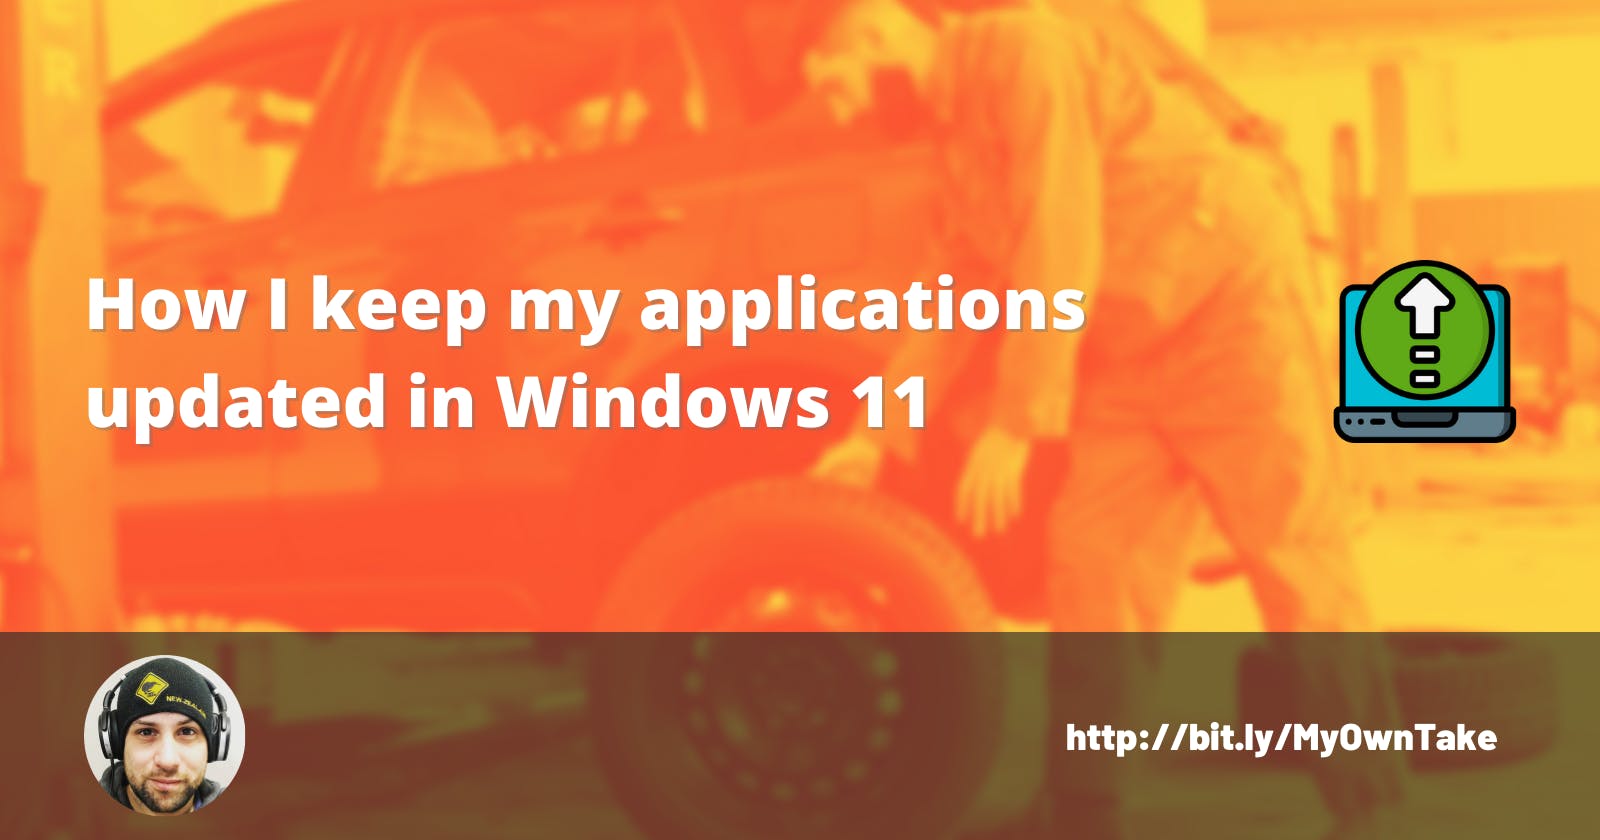 How I keep my applications updated in Windows 11